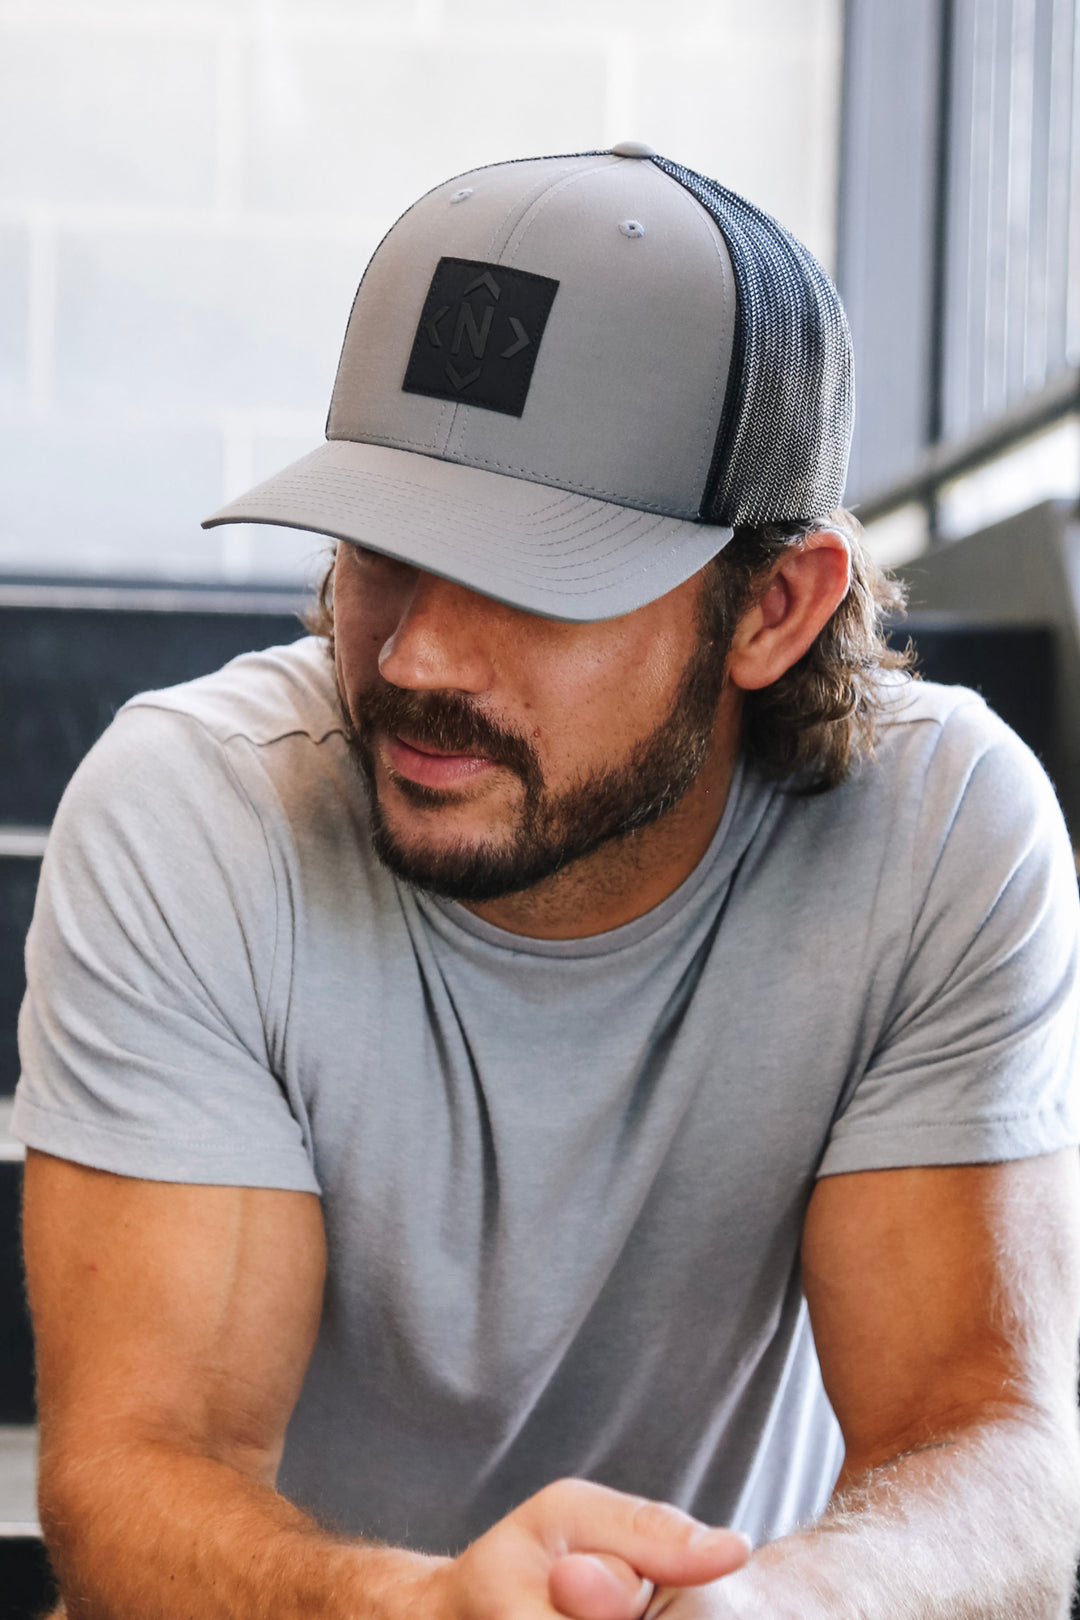 ALL ICONIC HEADWEAR – Nash Collection The